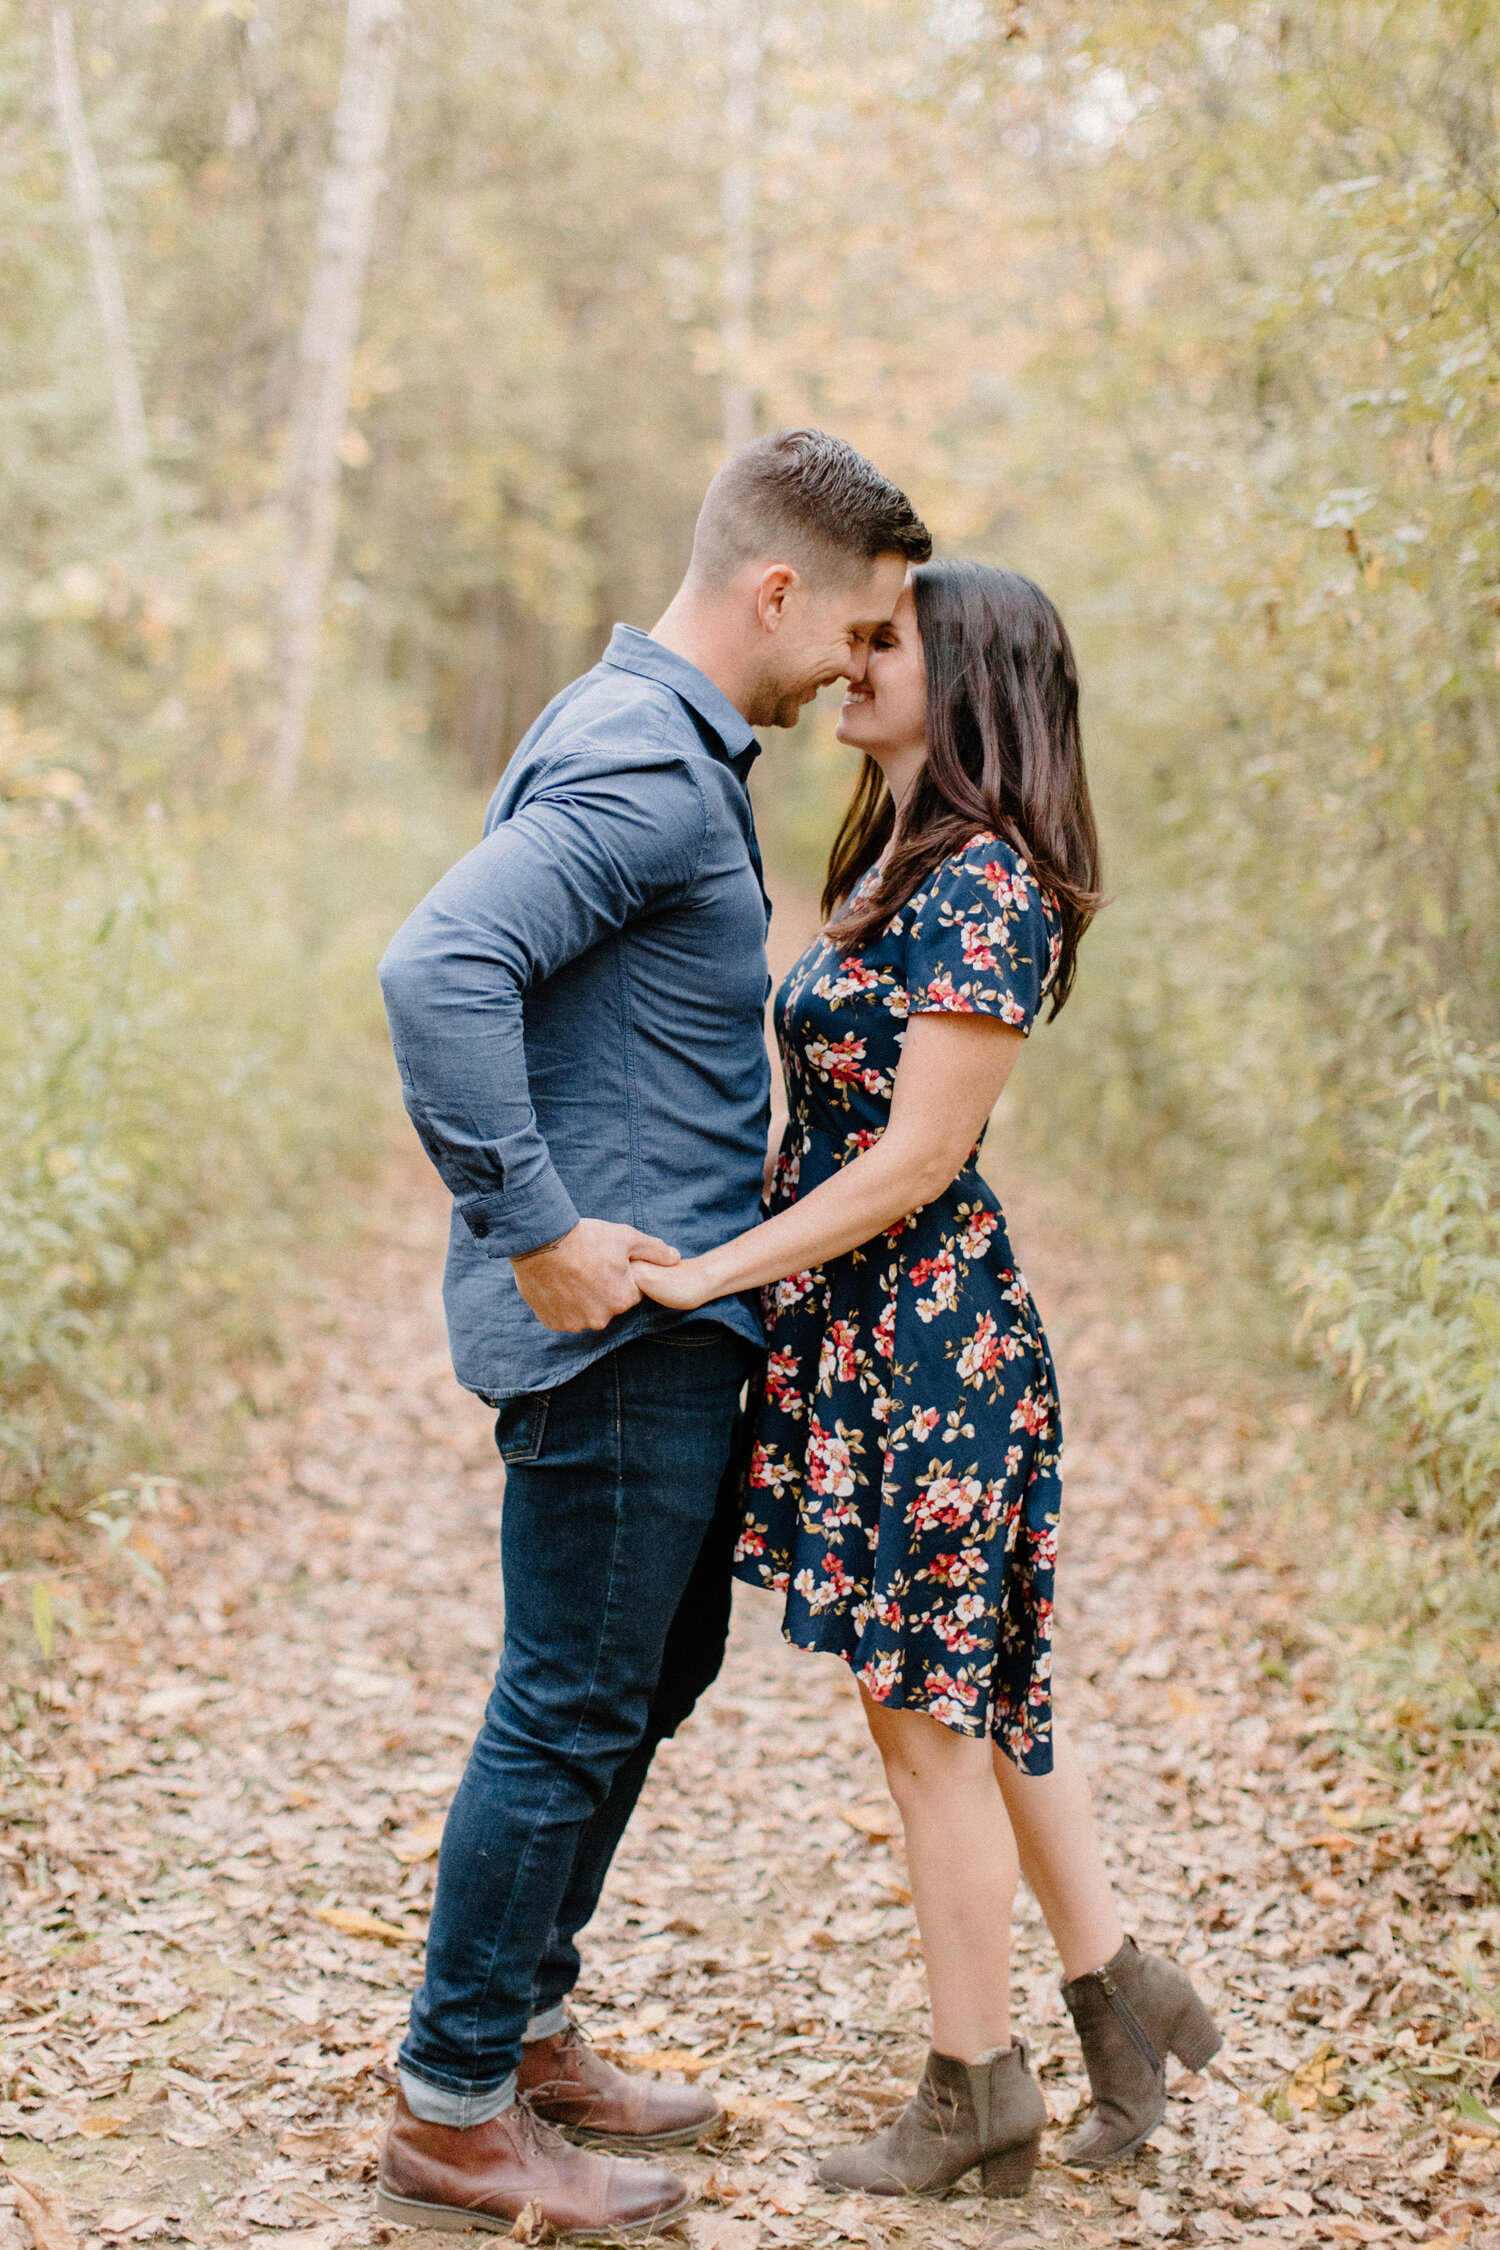  Stopped on an unpaved dirth pathway with falled autumn leaves, Brockville, Ontario photographer, Chelsea Mason Photography captures this couple holding hands and leaning in for a romantic kiss. womens high low floral dress with cap sleeves mens all 